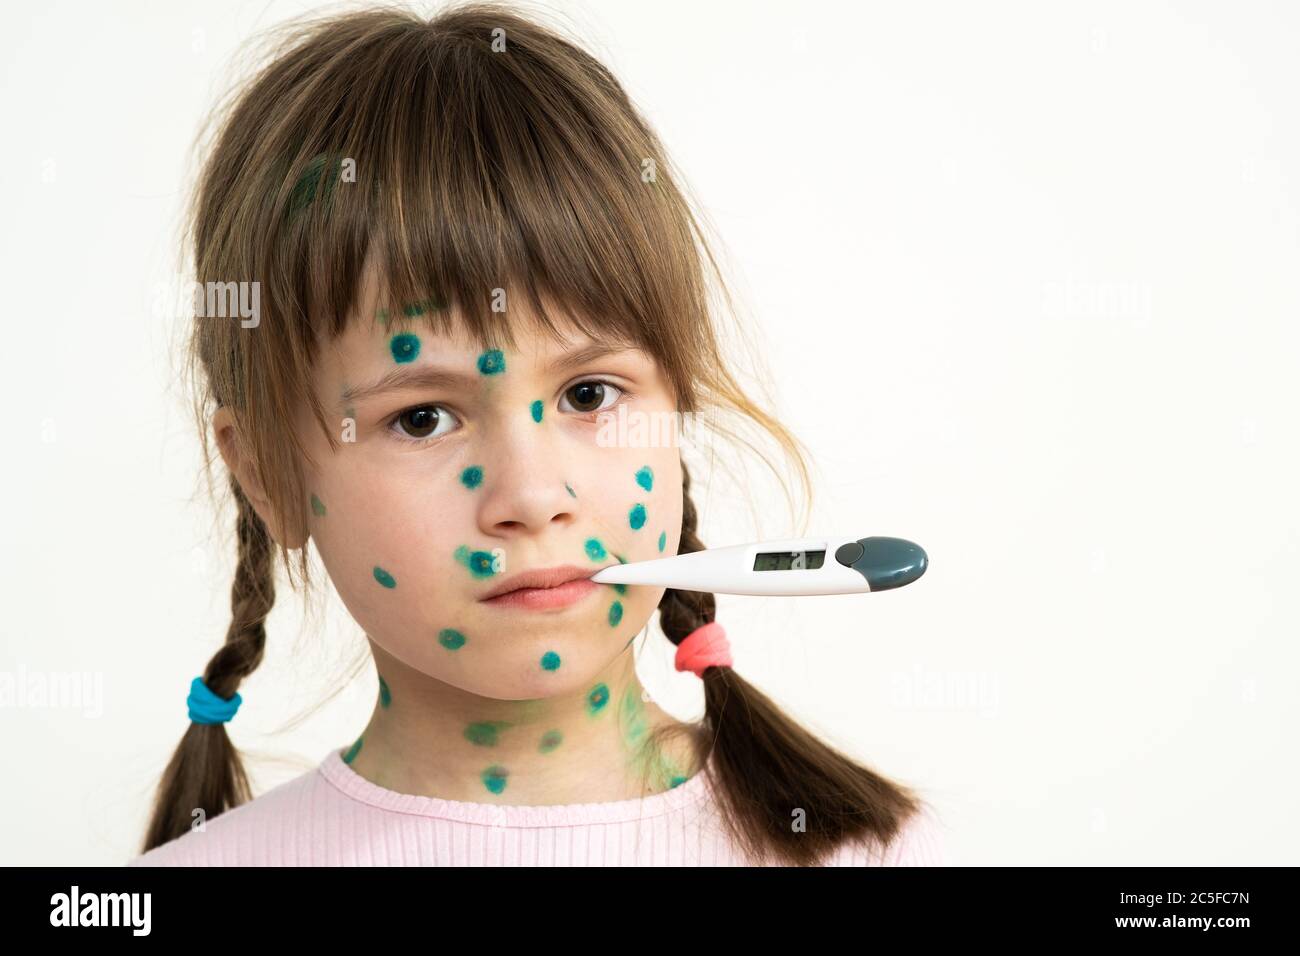 Child girl covered with green rashes on face ill with chickenpox, measles or rubella virus holding medical thermometer in her mouth having high temper Stock Photo